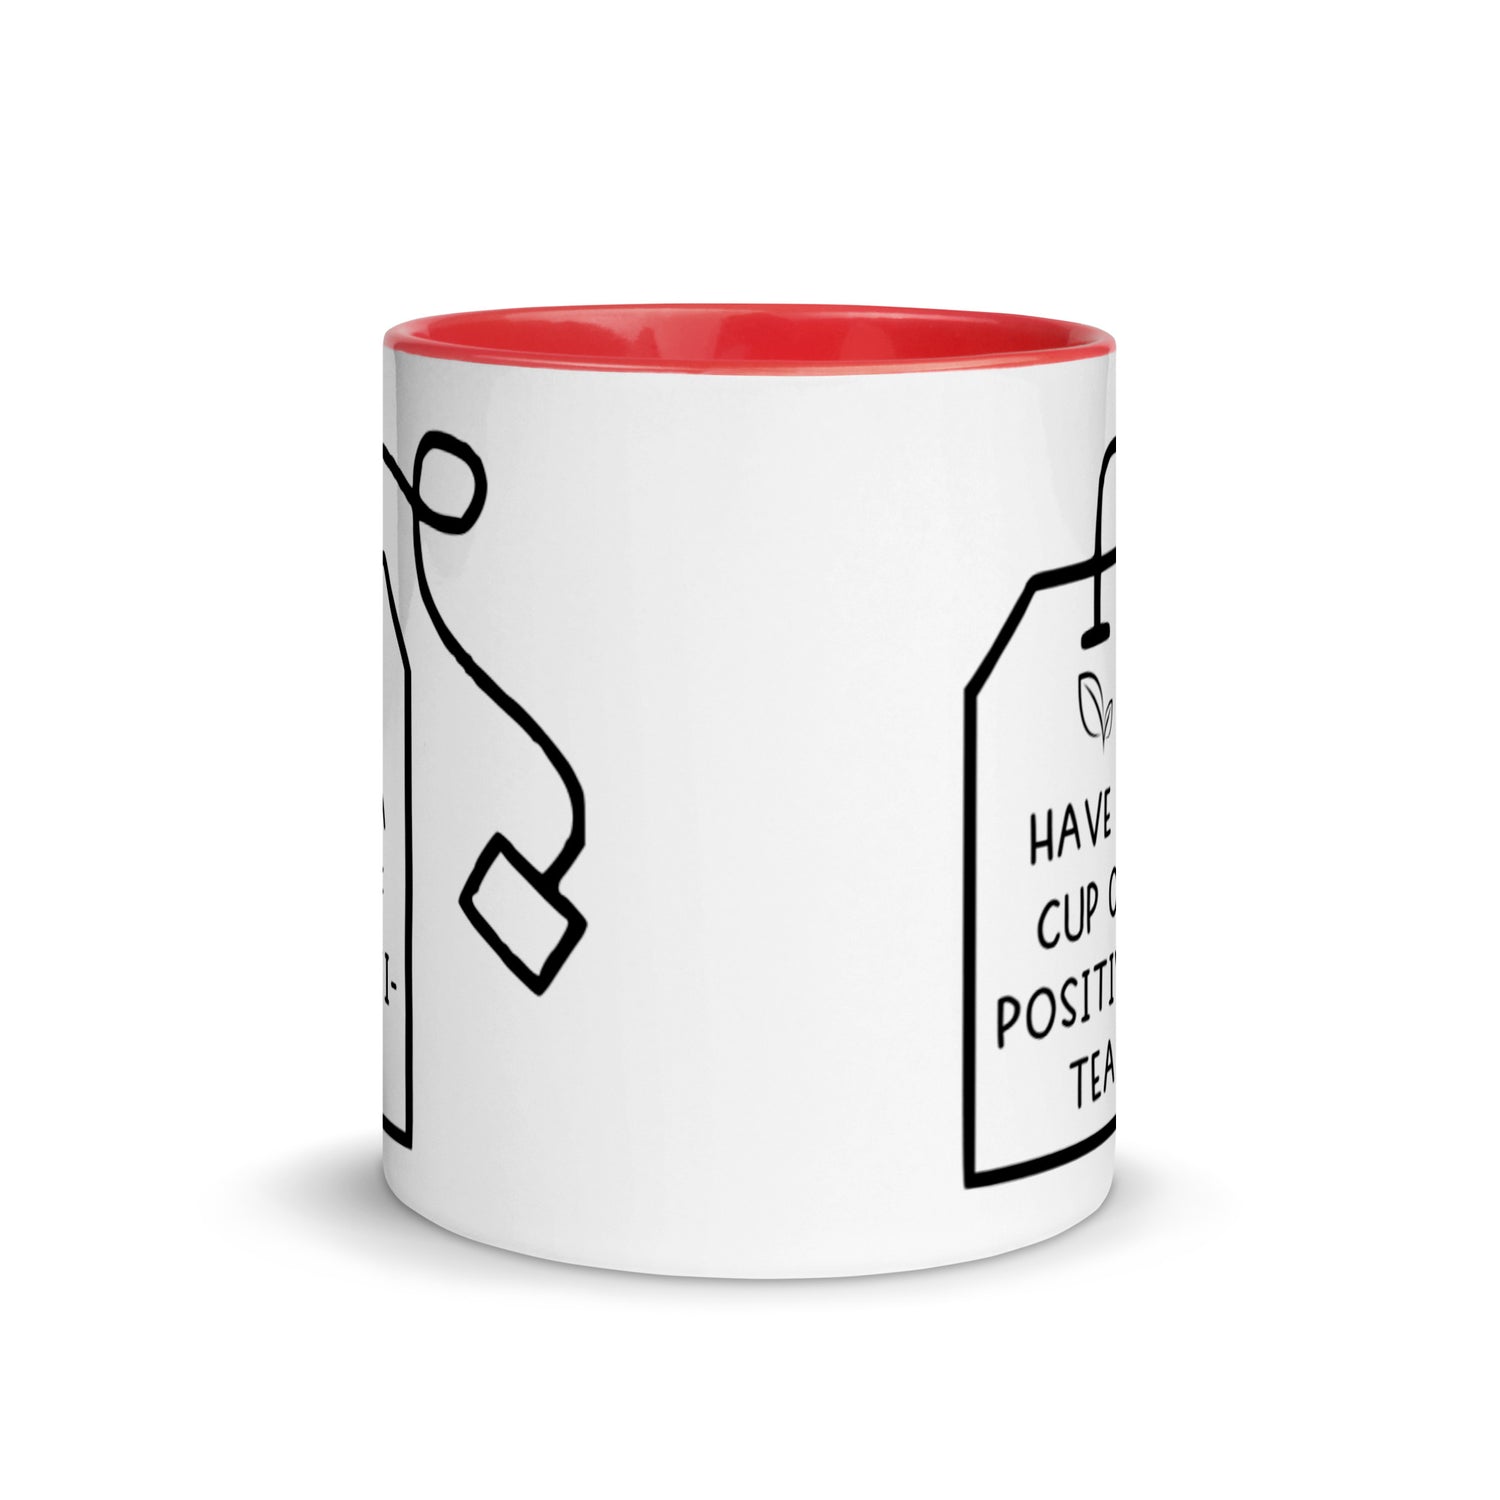 Have a Cup of Positivi-Tea Mug, red interior and handle